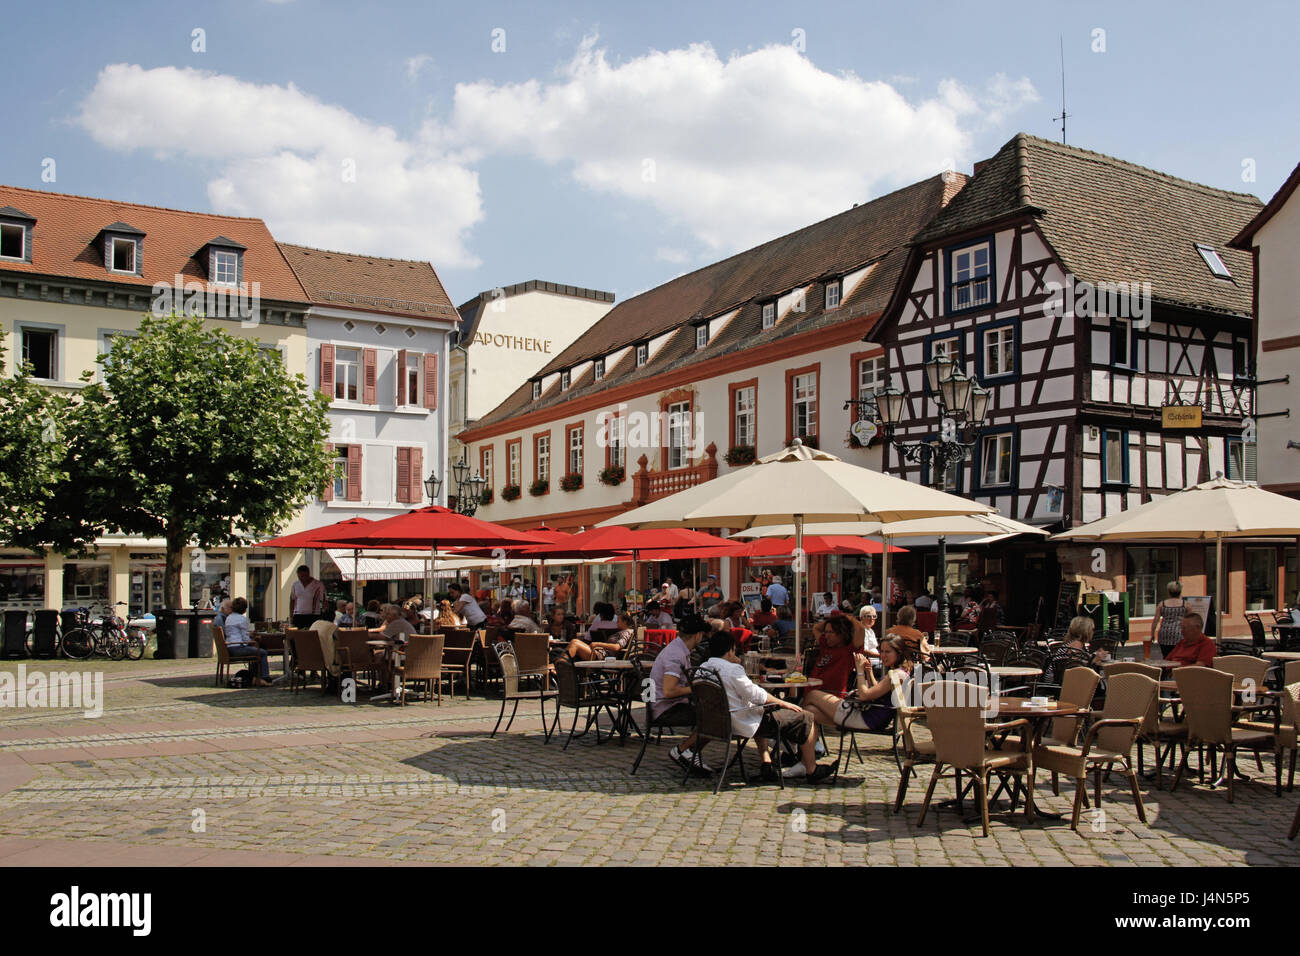 Germany, Rhineland-Palatinate, Neustadt in Weinstrasse, marketplace, street cafes, town, houses, buildings, structures, architecture, place of interest, destination, tourism, bars, restaurants, cafe, person, tourist, Stock Photo